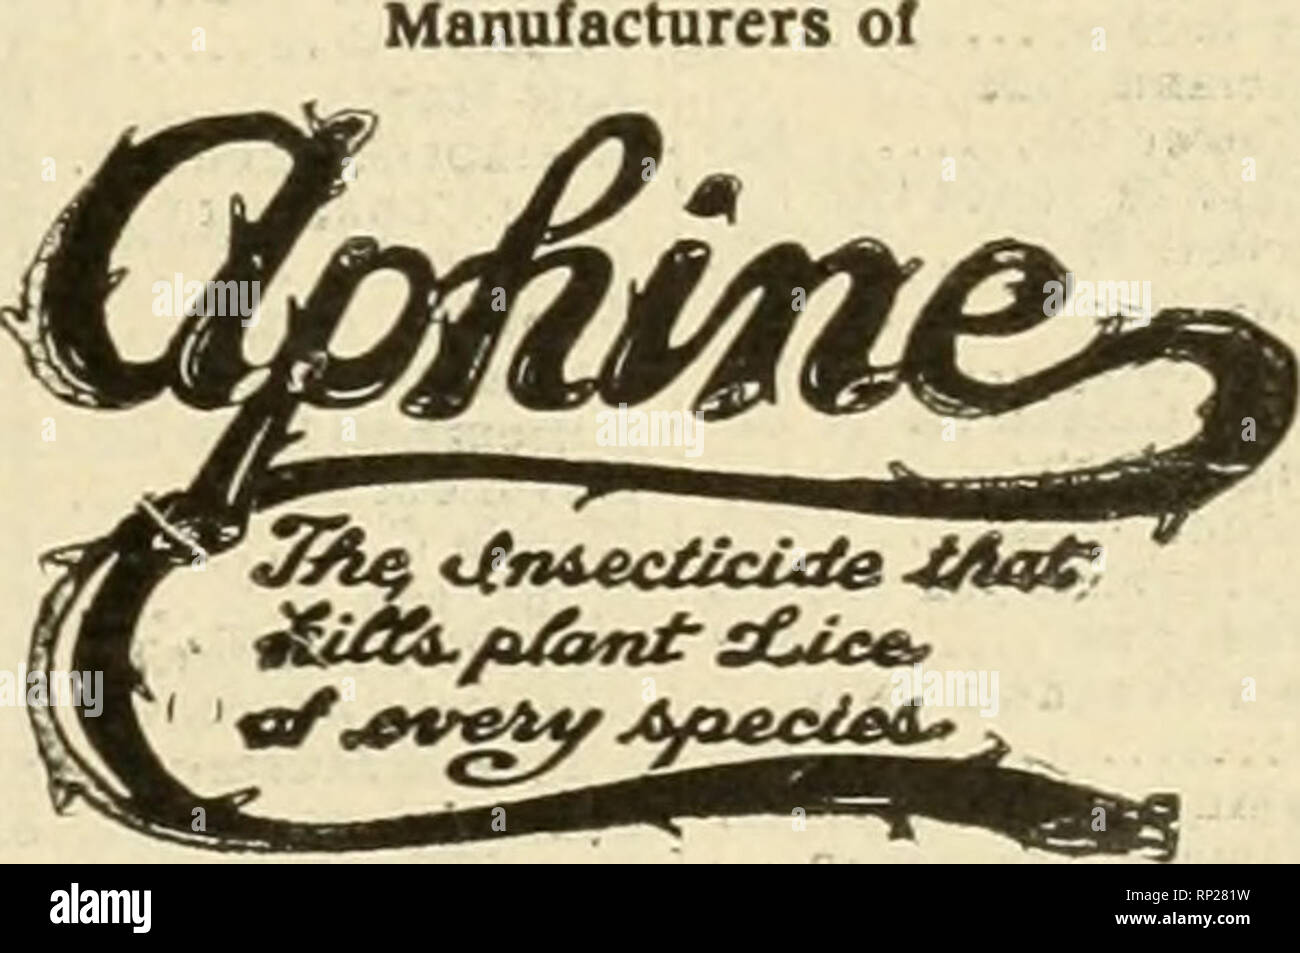 . The American florist : a weekly journal for the trade. Floriculture; Florists. NIKOTEEN For Spraying APHIS PUNK for Fumigating A«k Your Dealer for It. NICOTINE MFG. CO., ST. LOUIS, MO. Mention the American Florist when writing —CLAY'S— FERTILIZER WILL FEED YOUR PLANTS And Your BANK BALANCE At the Same Time. IT IS SAFE, SURE, ECONOMICAL. Manufactured by Clay &amp; Son, STRATFORD, LONDON, ENGLAND. Unequaled for greenhouse and landscape fertilizing. THE PULVERIZED MANURE COMPANY 32 UNION STOCK YARDS, CHICAGO TRADE DIRECTORY Prlc* 93.00 Poatpald. American Florist Co^ 440 S. Dearborn St.. CBIOACO Stock Photo